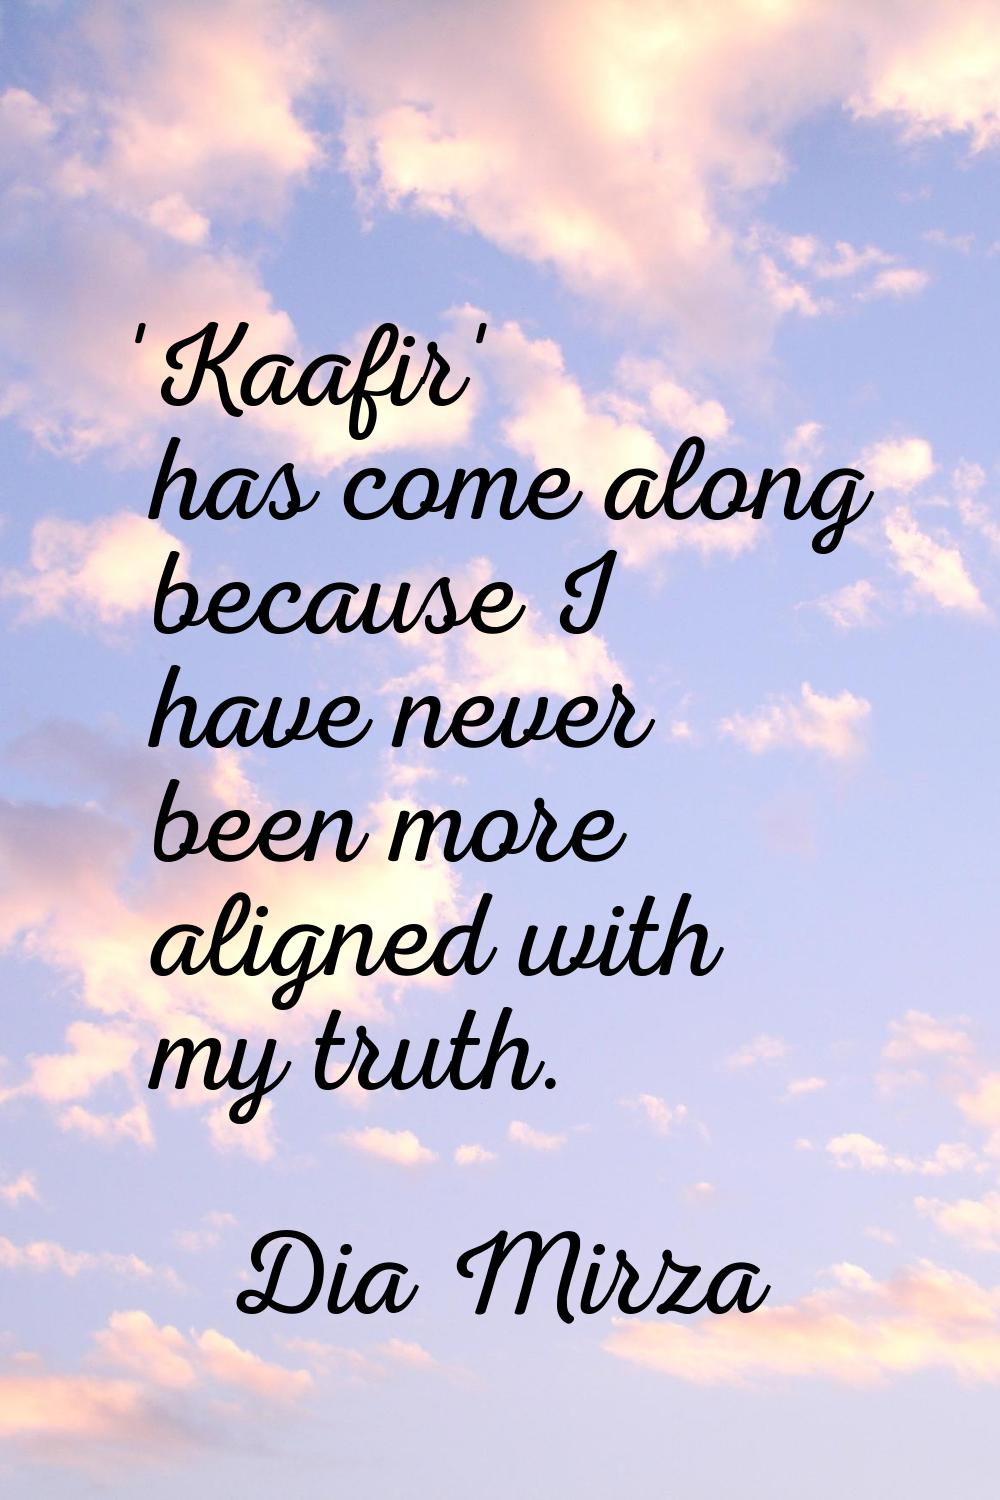 'Kaafir' has come along because I have never been more aligned with my truth.